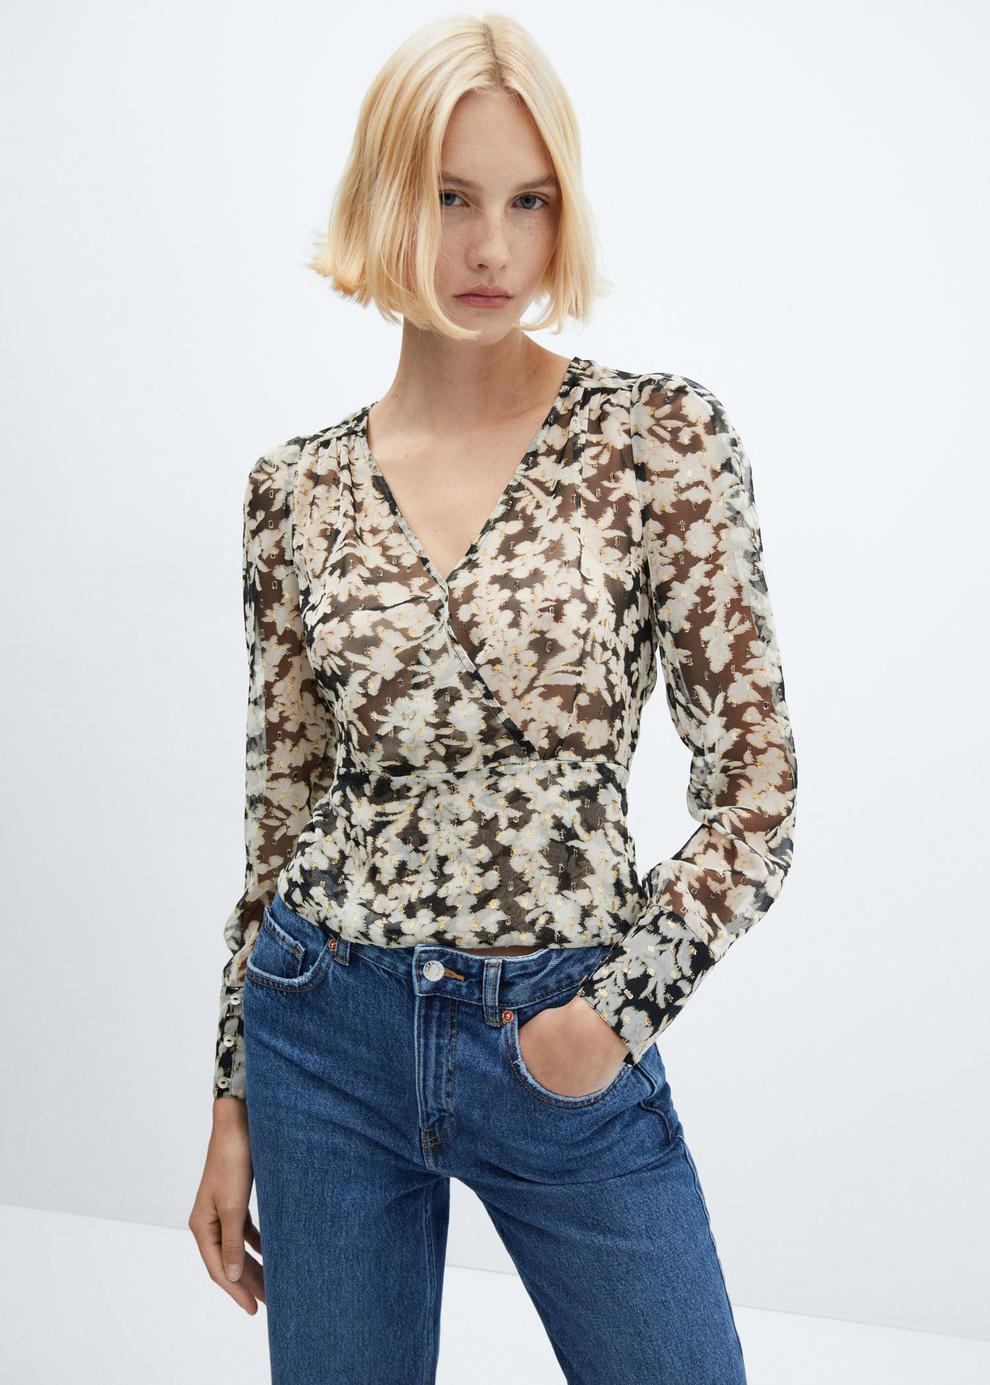 Floral print crossover blouse offers at S$ 49.9 in Mango